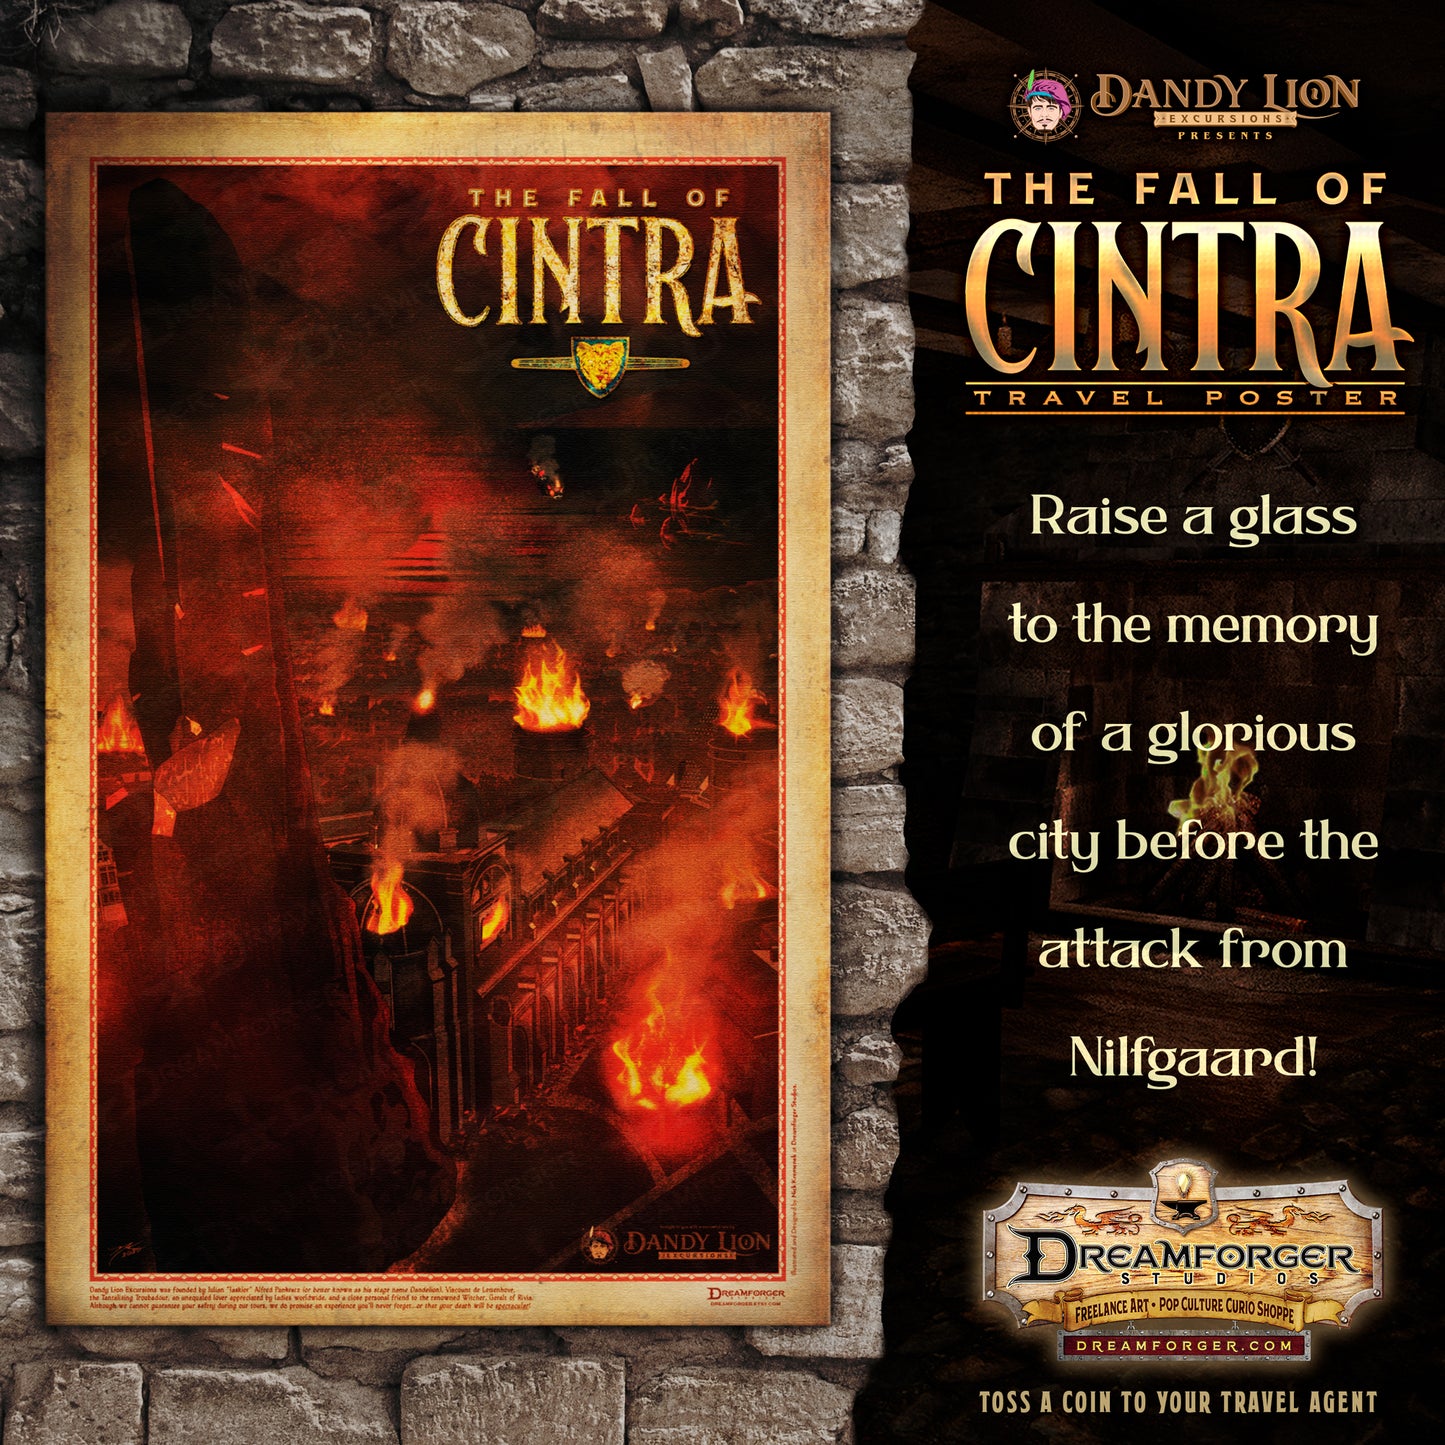 "The Fall of Cintra" (Dandy Lion Excursions Travel series)